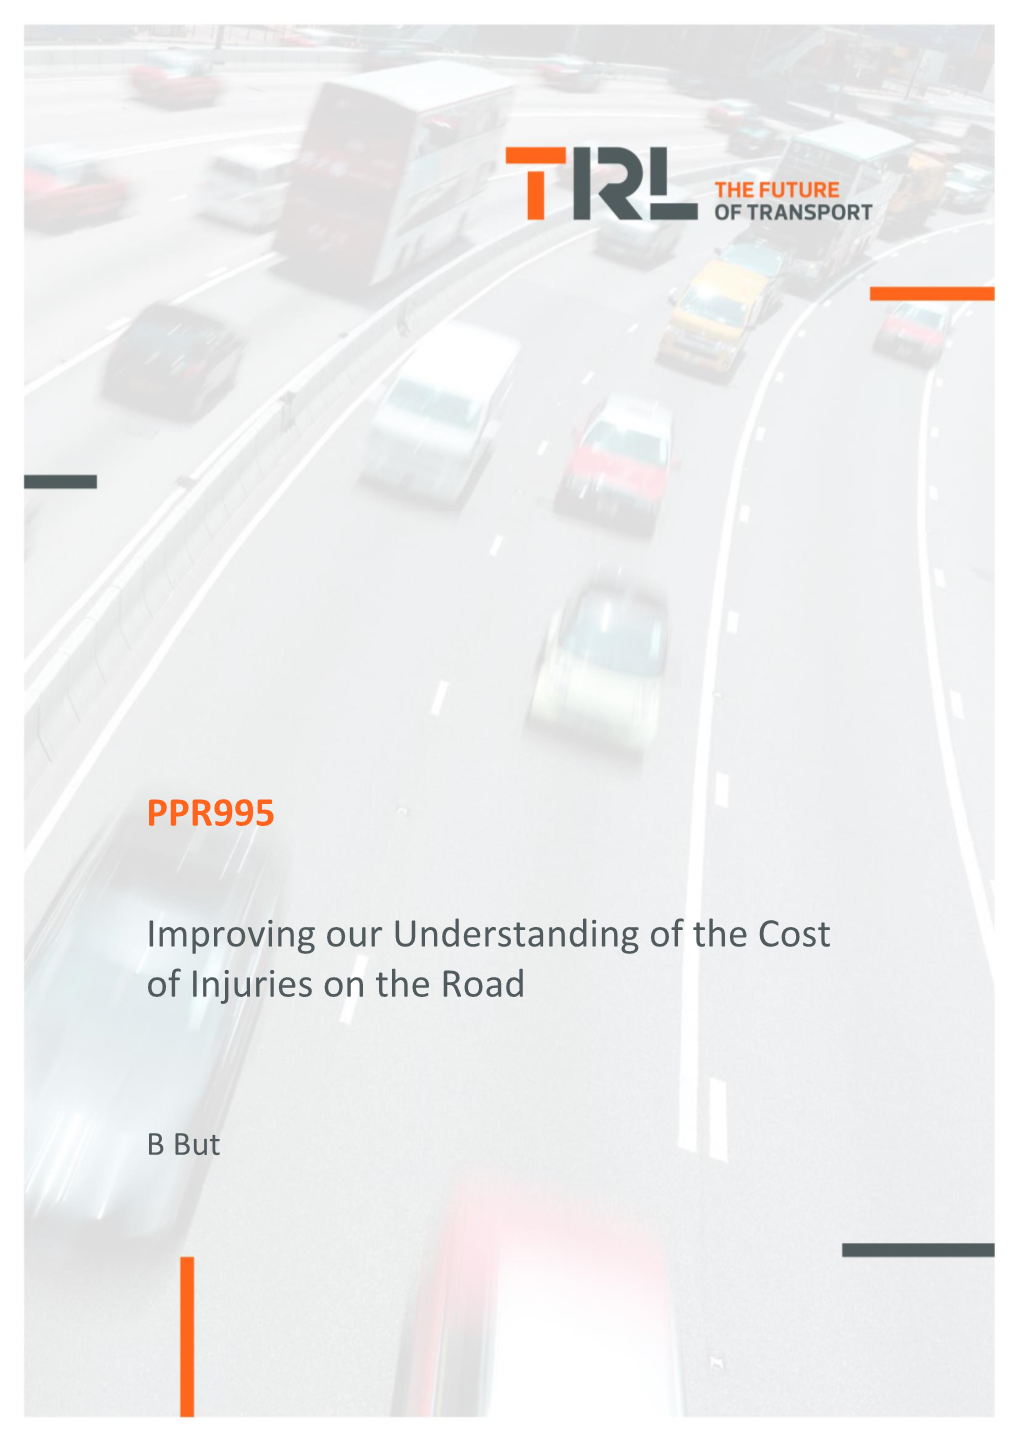 PPR995 Improving Our Understanding of the Cost of Injuries on the Road